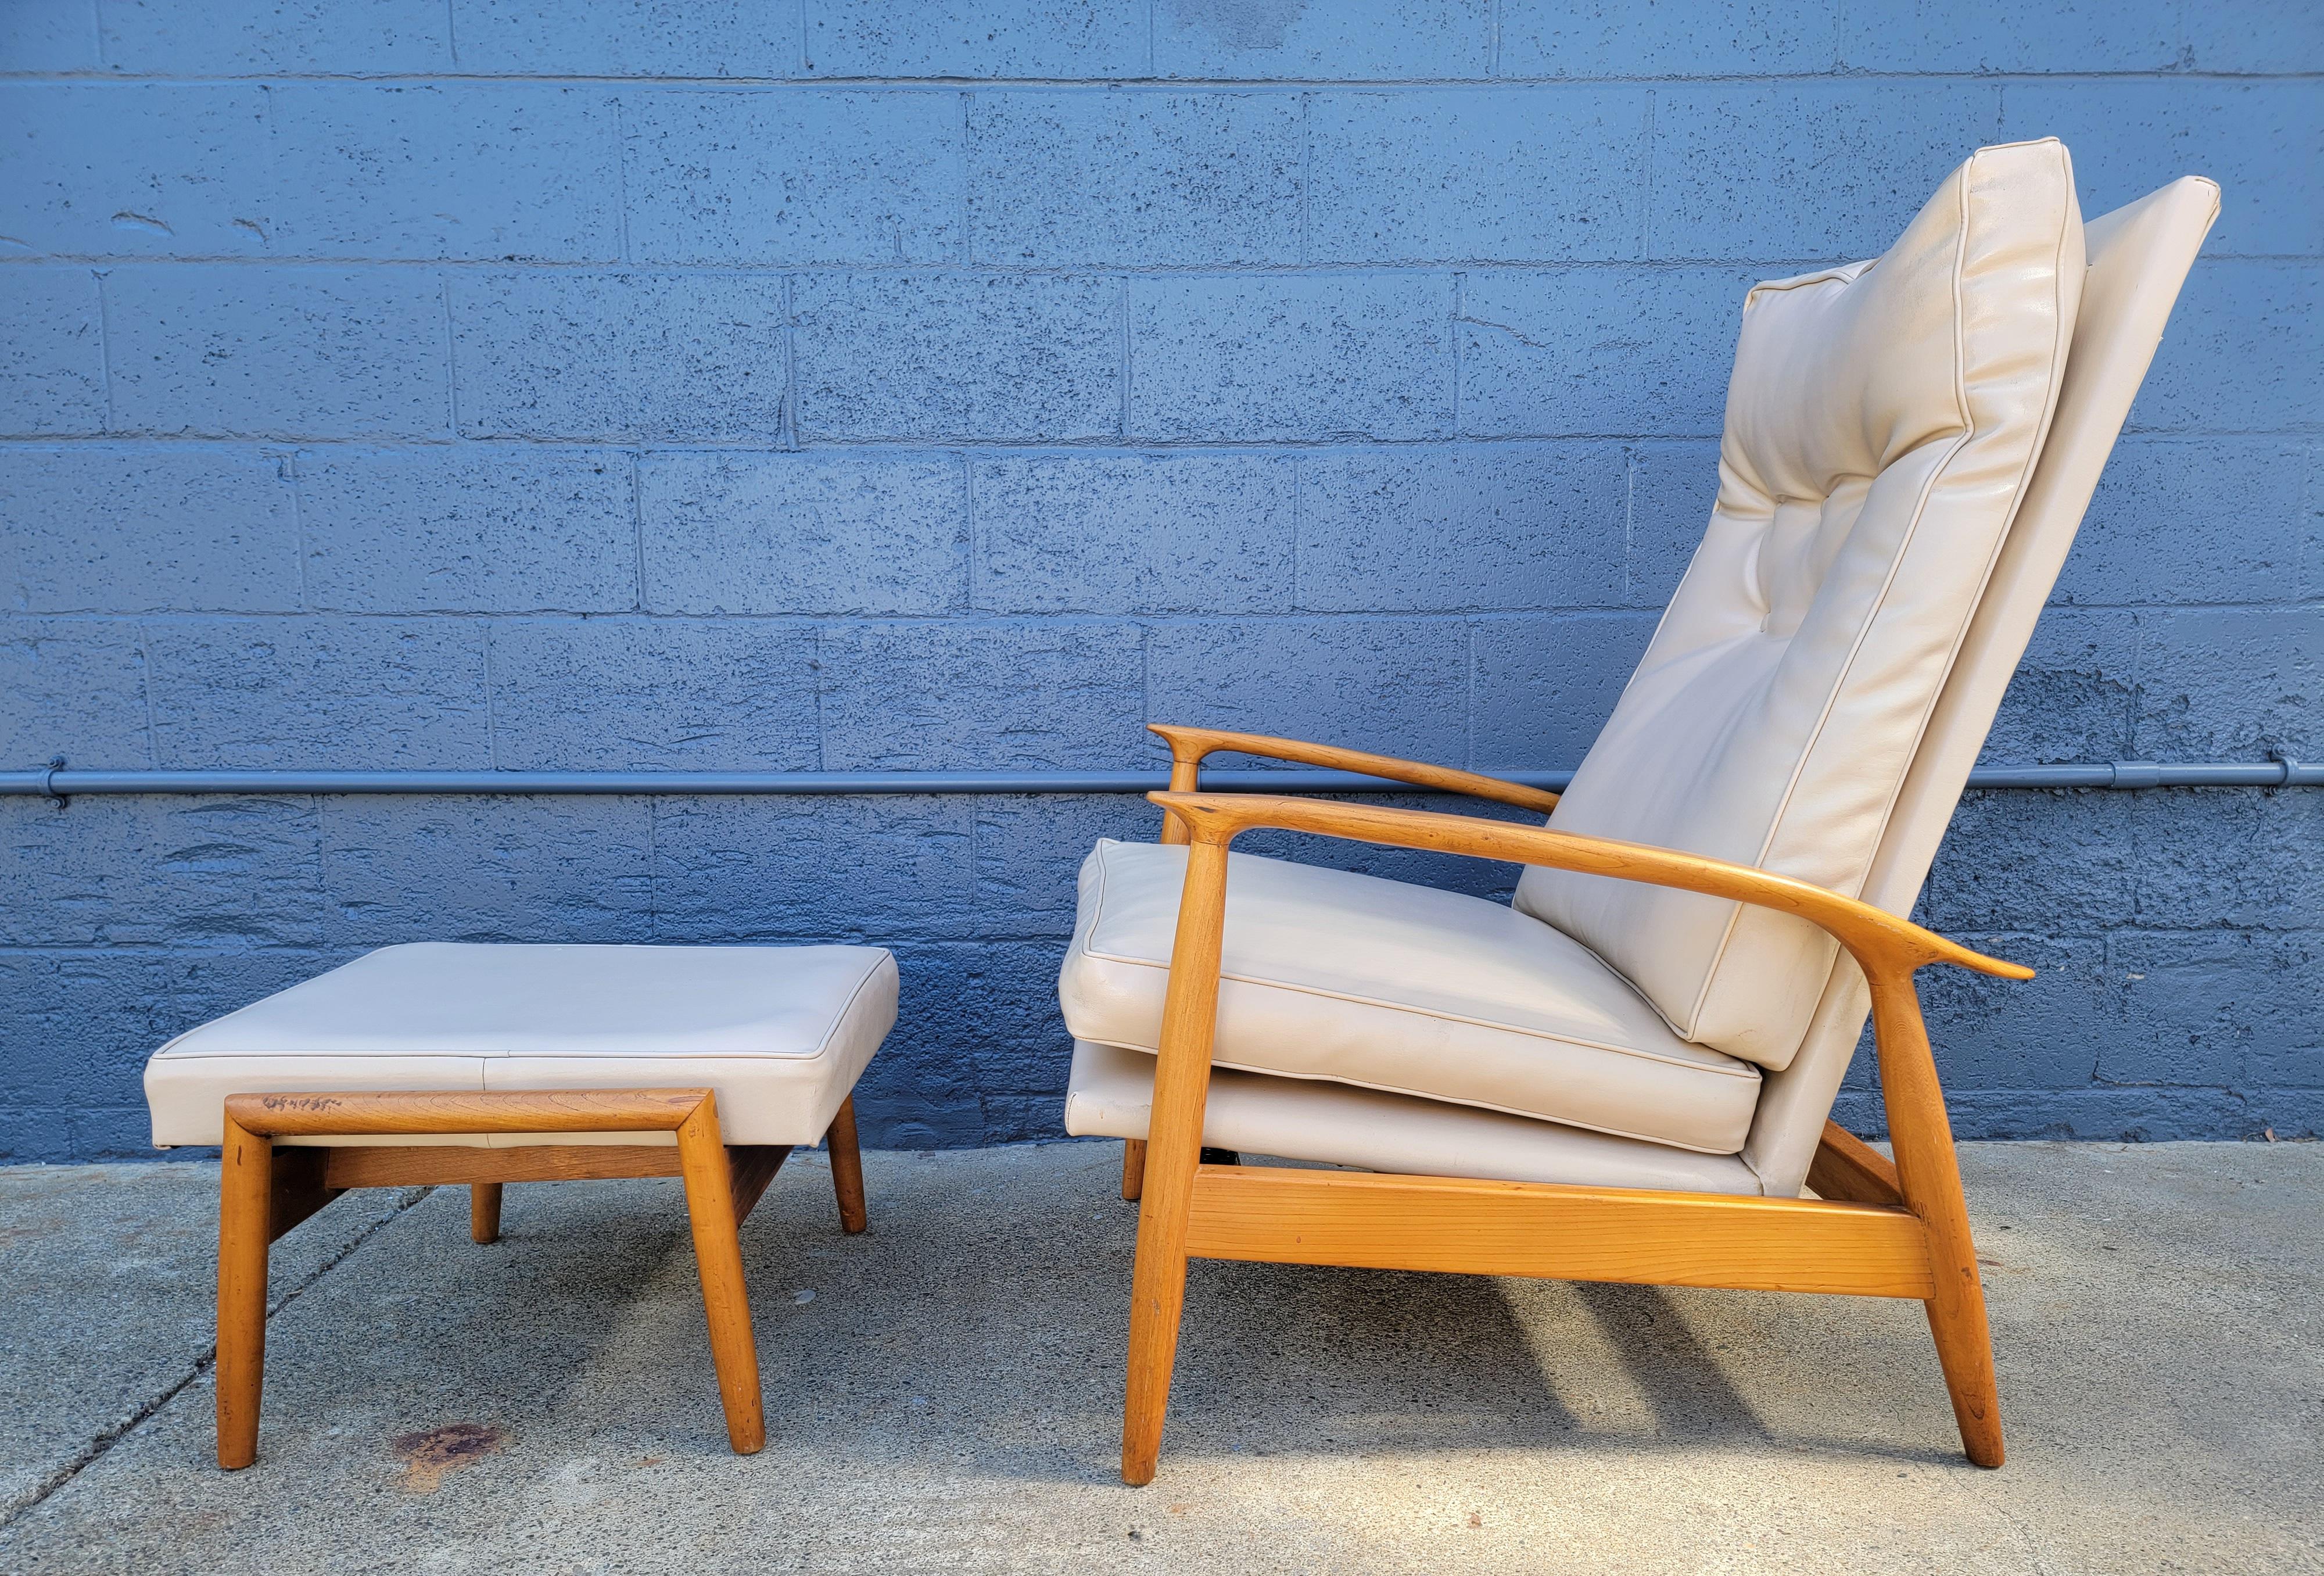 Milo Baughman for James Inc. adjustable and rocking lounge chair with accompanying ottoman. Chair can lock into multiple reclined positions or rock. Footstool has one adjustment allowing upward tilt. Amazingly comfortable. Very good original vintage